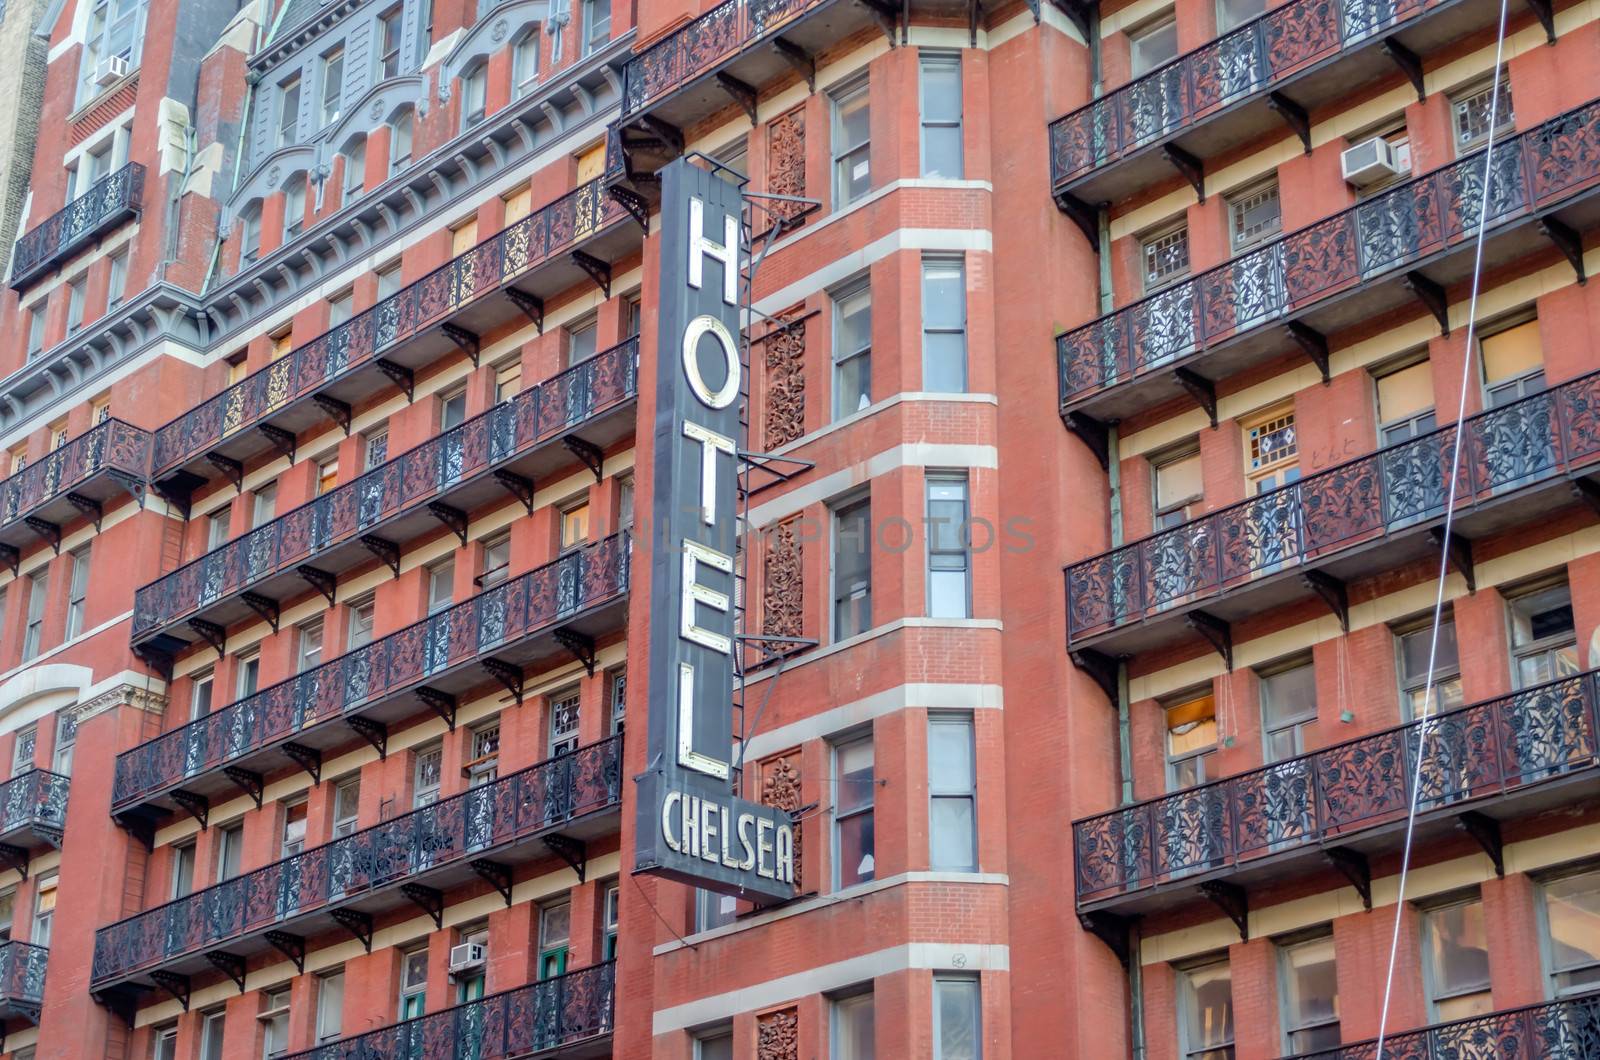 NEW YORK - CIRCA MAY 2013: The Hotel Chelsea, New York, circa May 2013. The Hotel is a historic landmark in New York, known for the notability of its residents over the years